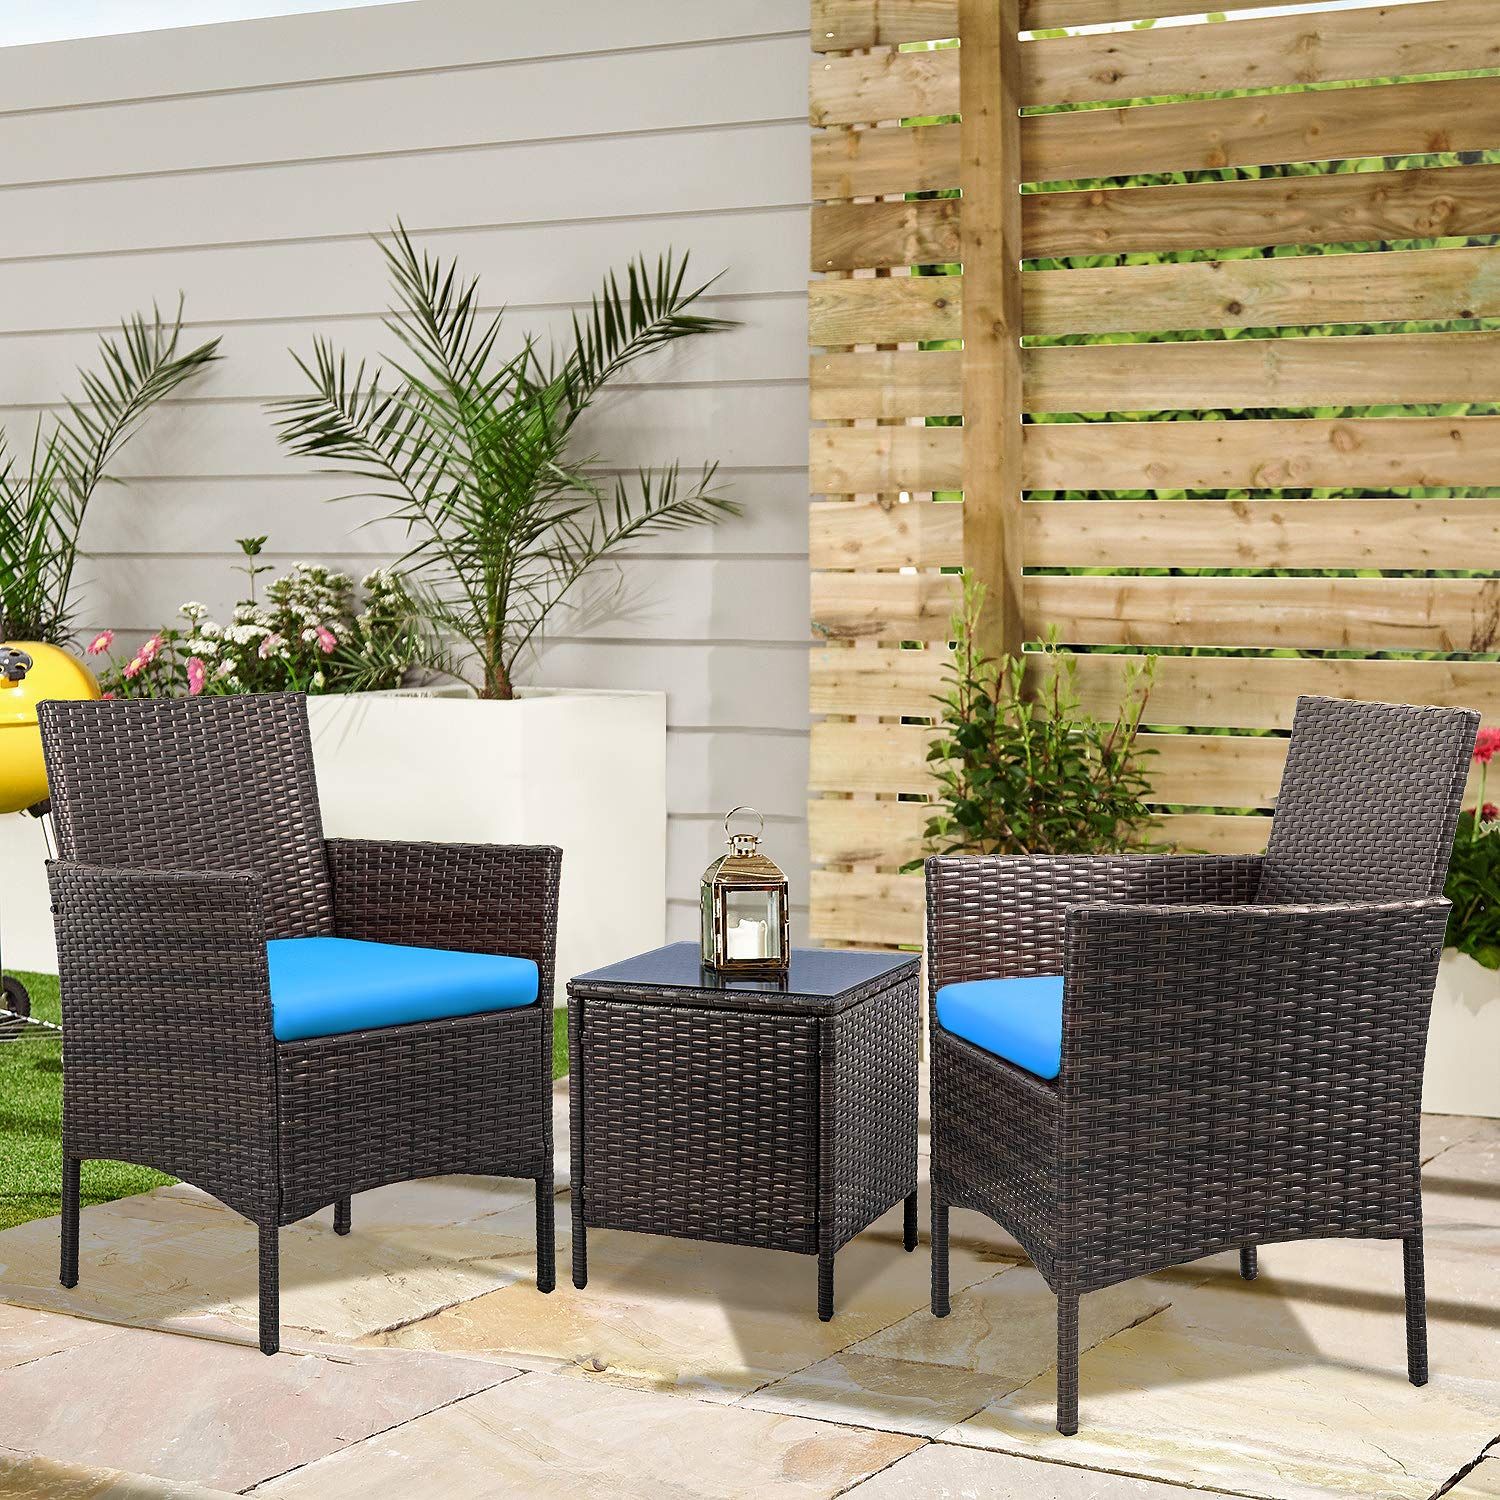 Walnew 3 Pcs Outdoor Patio Furniture Pe Rattan Wicker Table And Chairs Pertaining To Blue And Brown Wicker Outdoor Patio Sets (View 4 of 15)